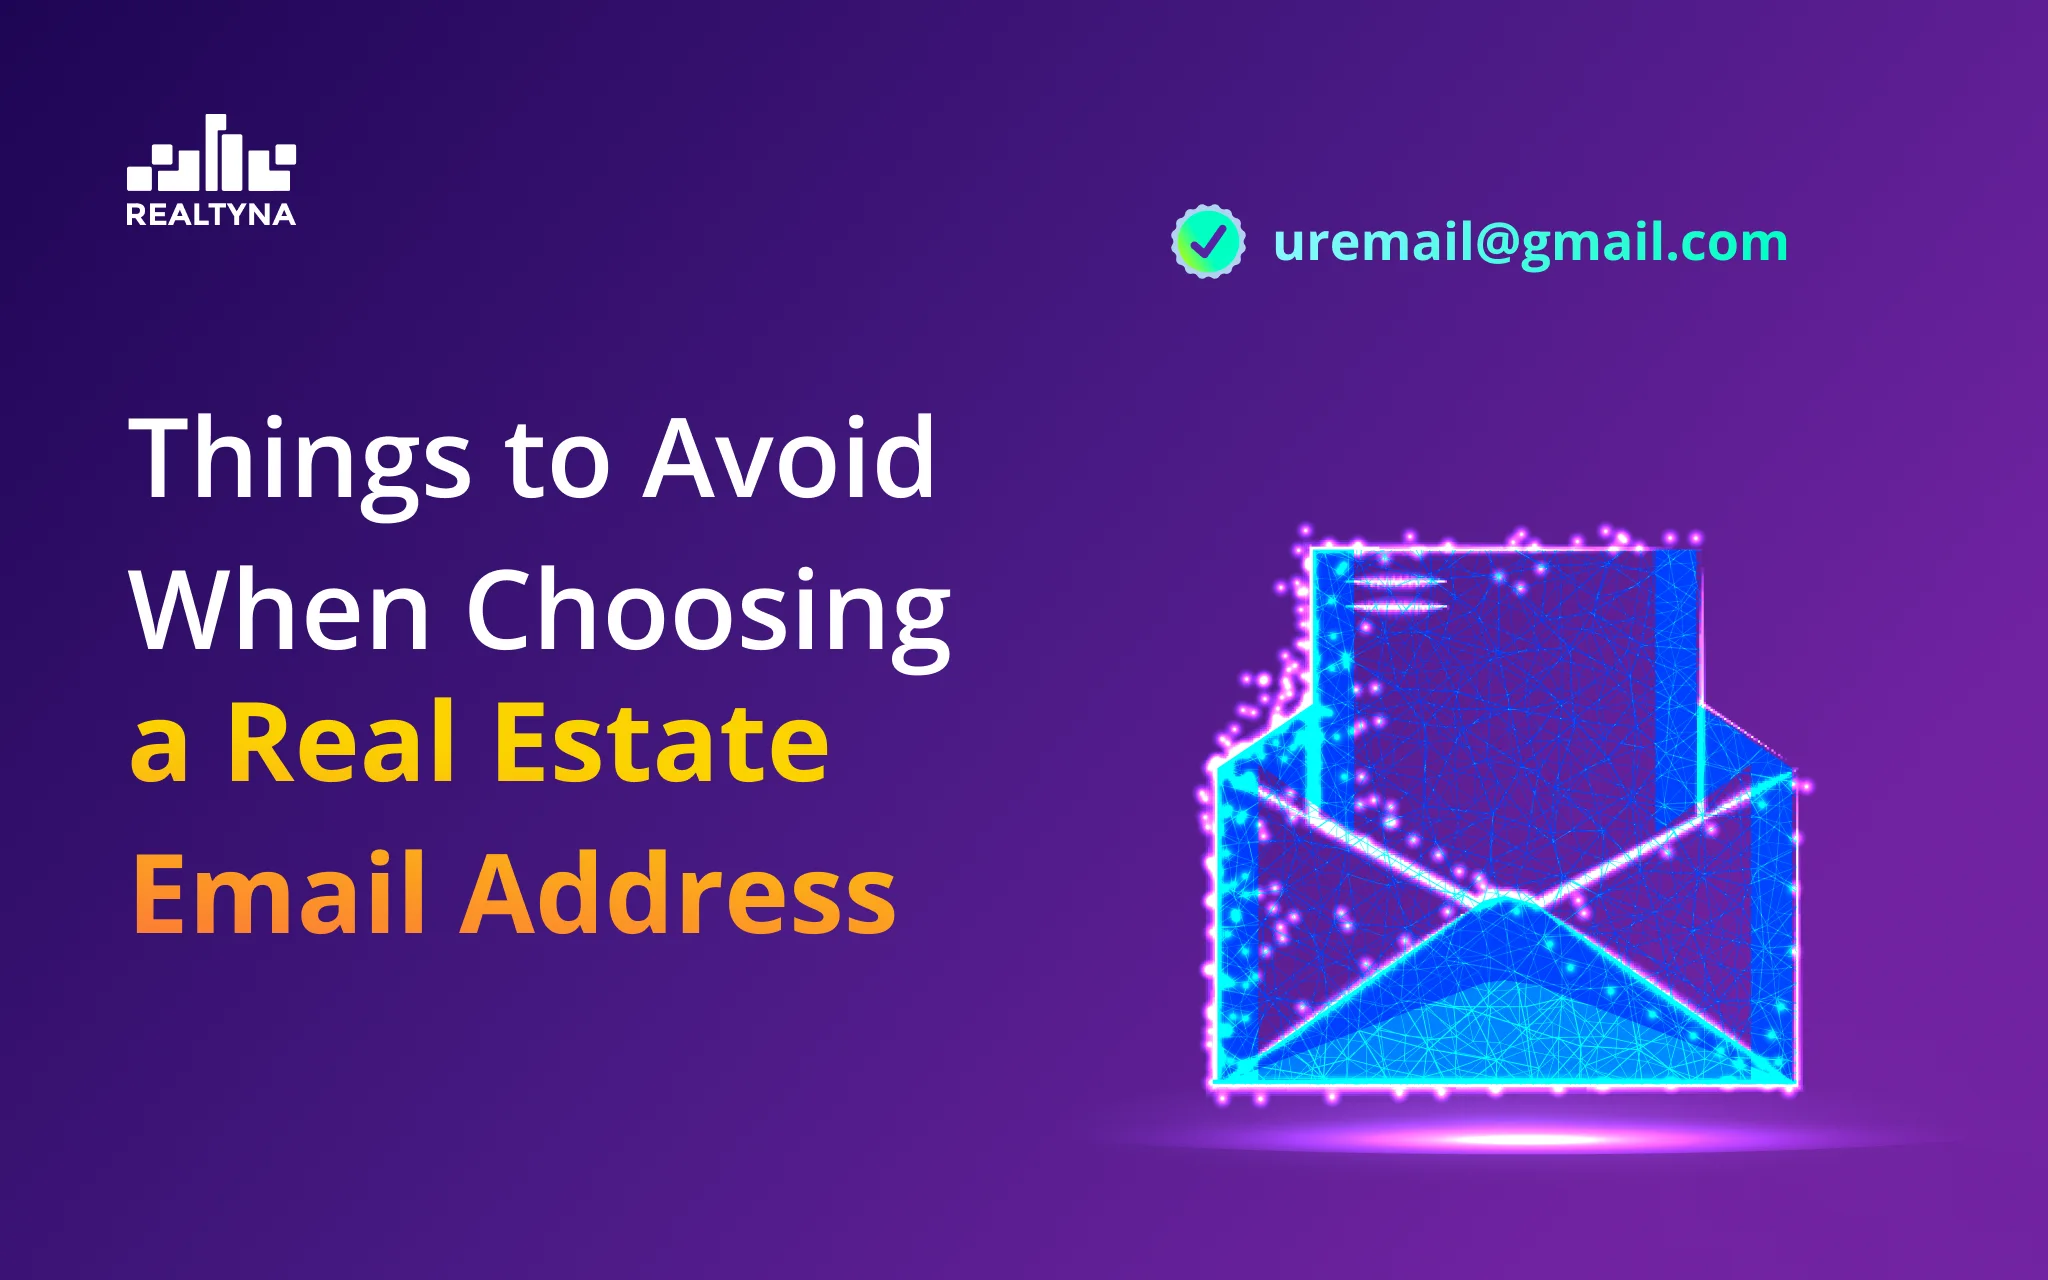 Things to Avoid When Choosing a Real Estate Email Address